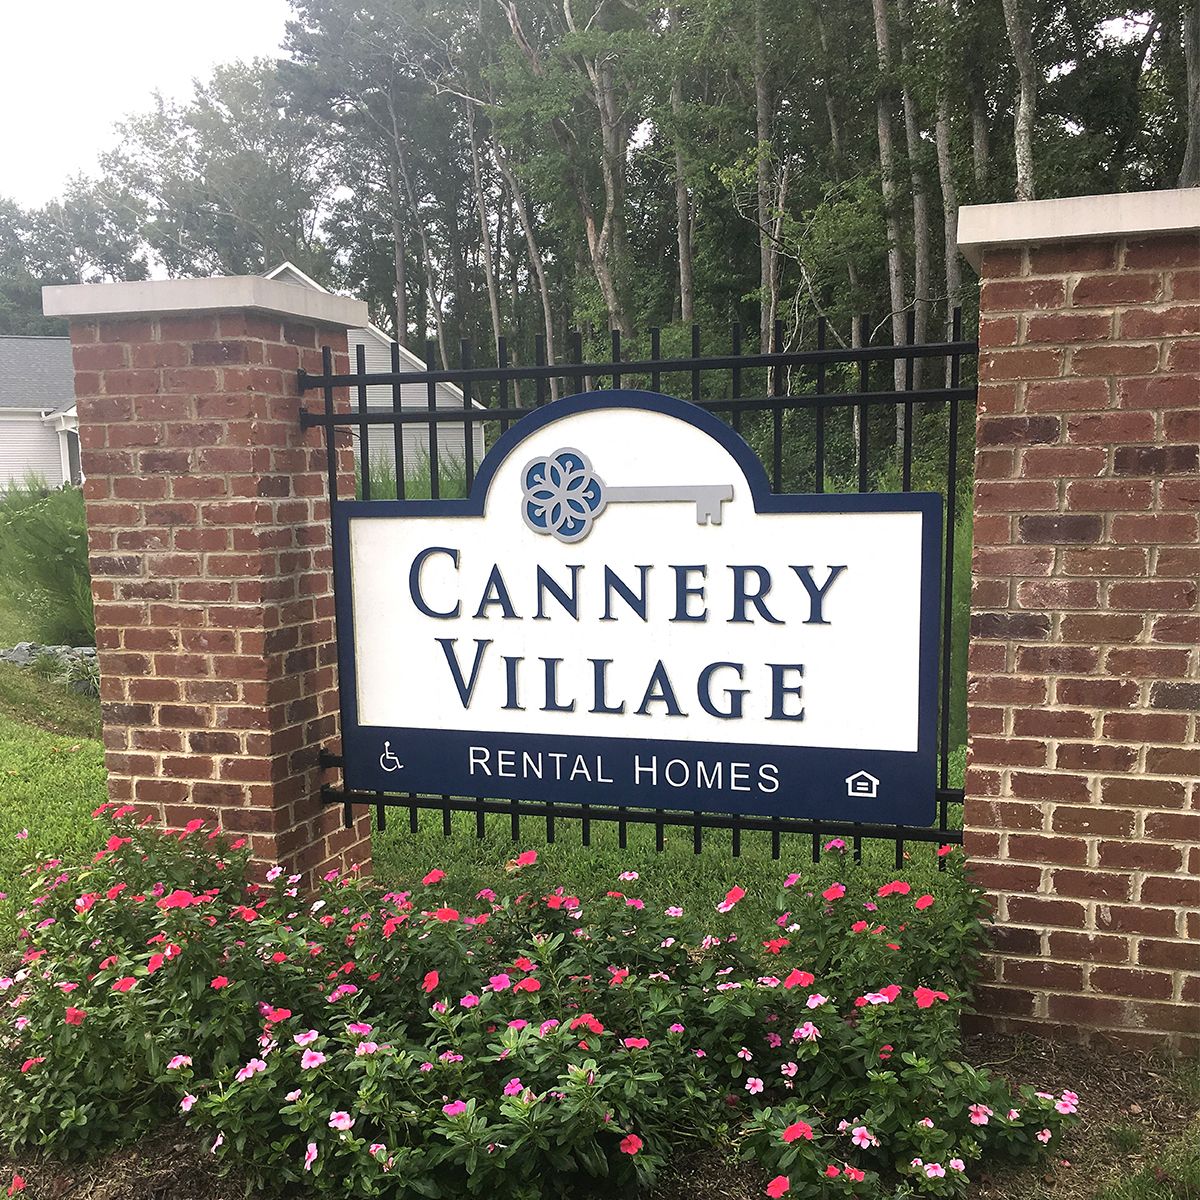 CANNERY VILLAGE